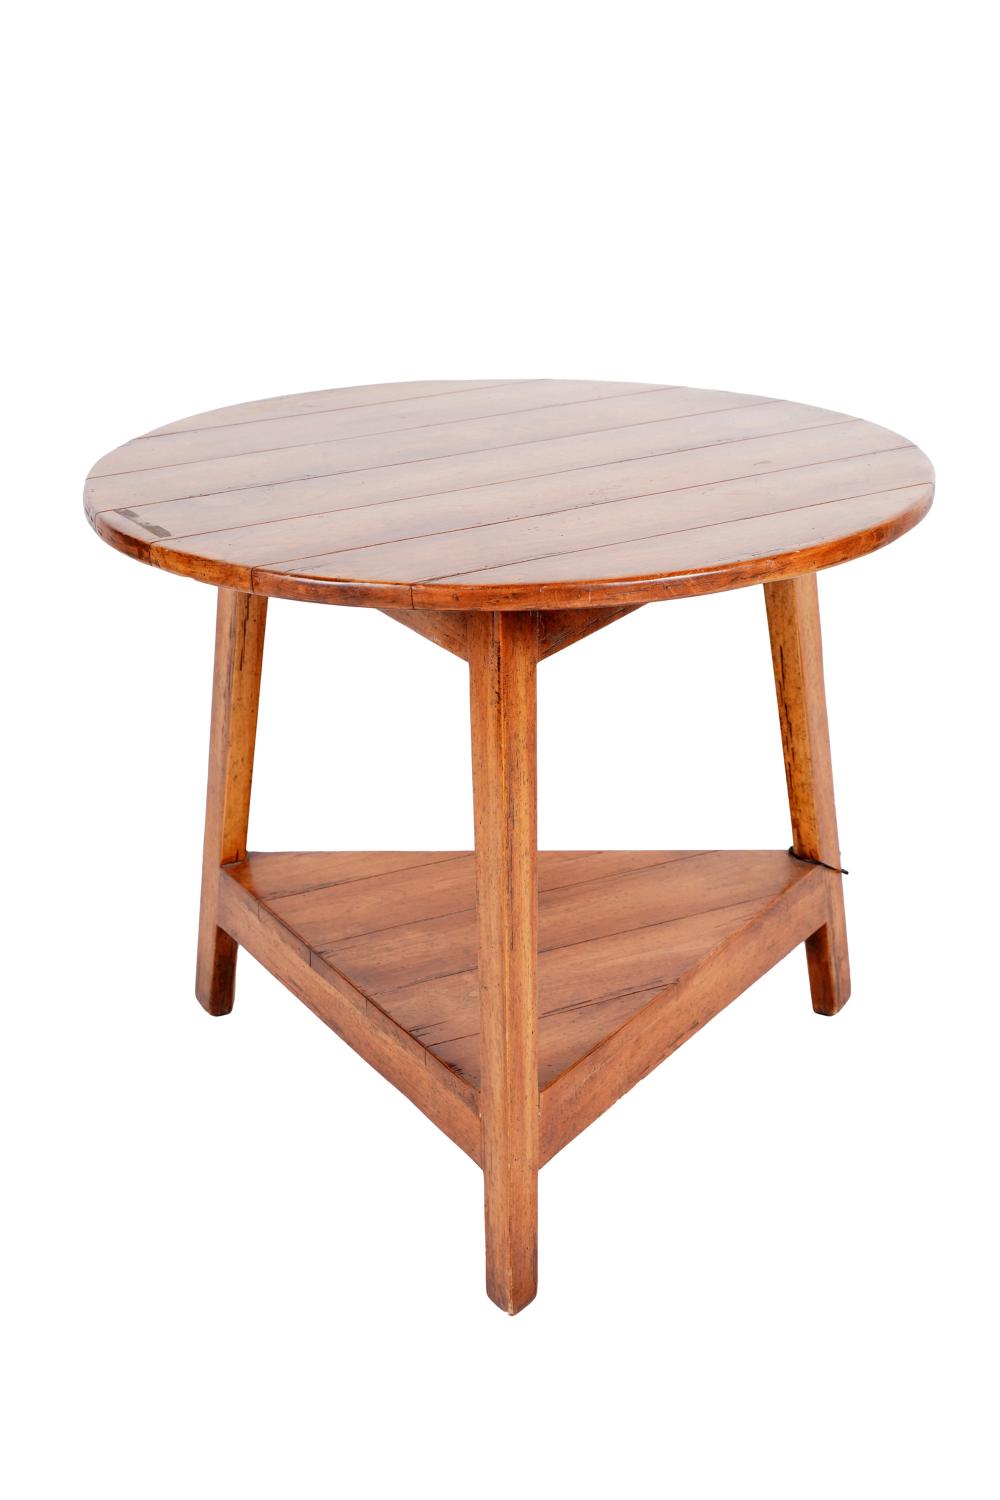 FRUITWOOD CRICKET TABLElate 20th